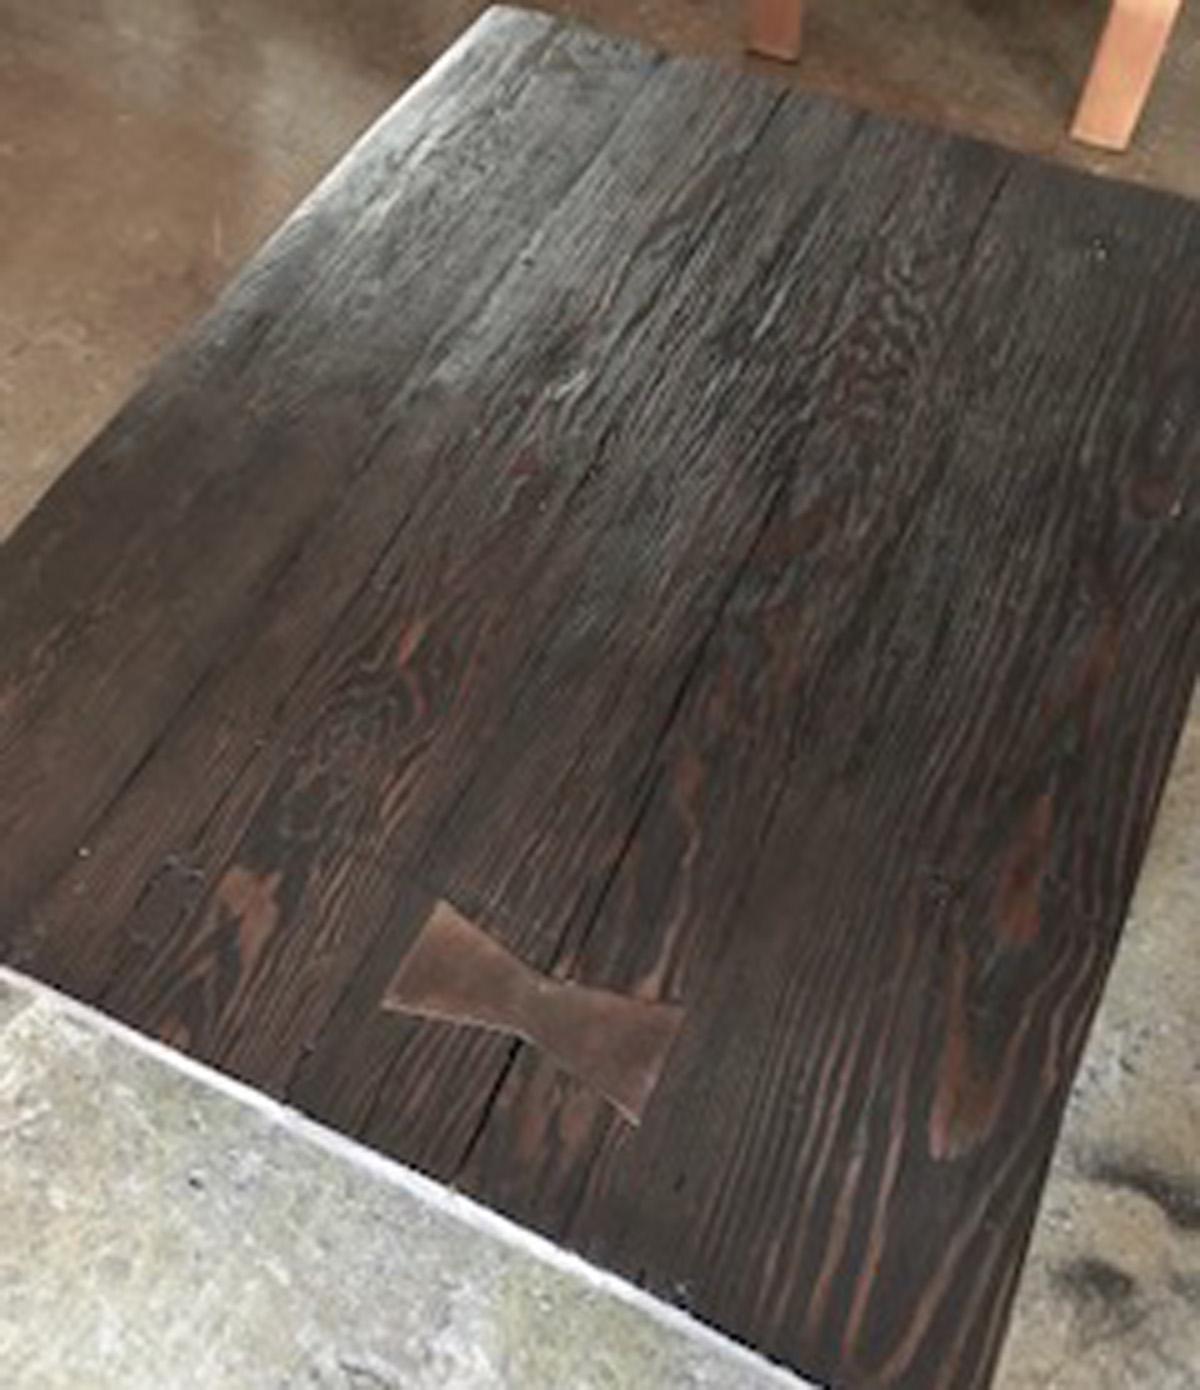 Custom coffee table is made Douglas fir, built up to 3 to 3.5 inches thick. 
Can be made in custom sizes and finishes. Made by Dos Gallos Studio in Los Angeles. Please note that custom made pieces are not returnable.  

CUSTOM PRICES ARE SUBJECT TO